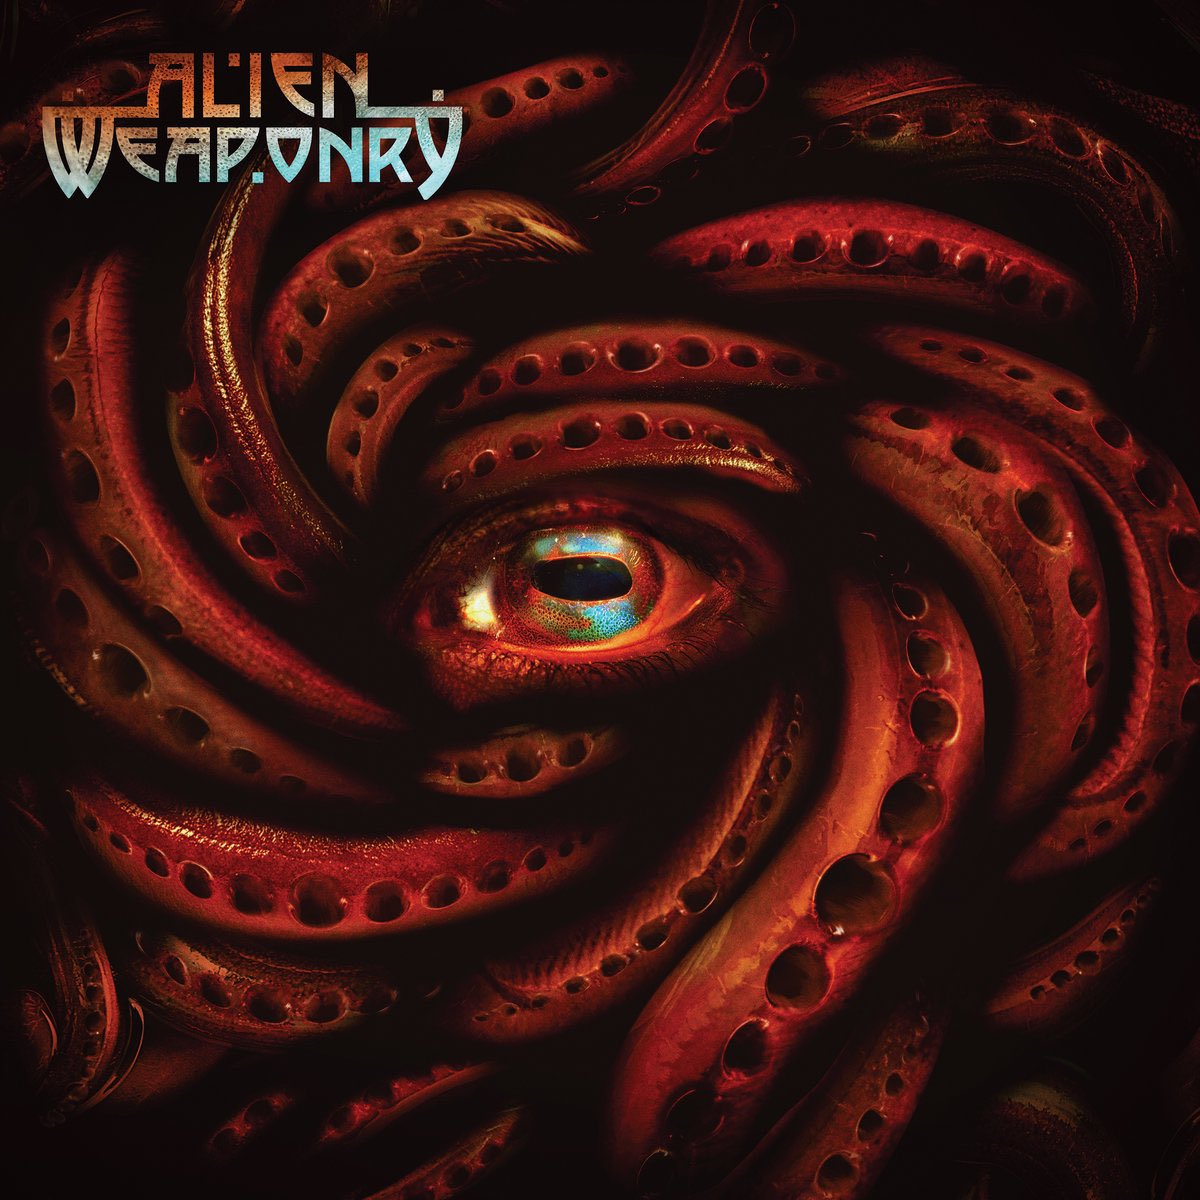 The second album by New Zealand's @AlienWeaponry out now! Check out 'Tangaroa'! 🤘🏻

Listen to Tangaroa here: m.youtube.com/watch?v=5kwIkF…

#albumoftheweek #heavymetal #alienweaponry #outnow #albumrelease #tangaroa #newzealand #band #heavymetalculture #thrashmusic #harecoremusic